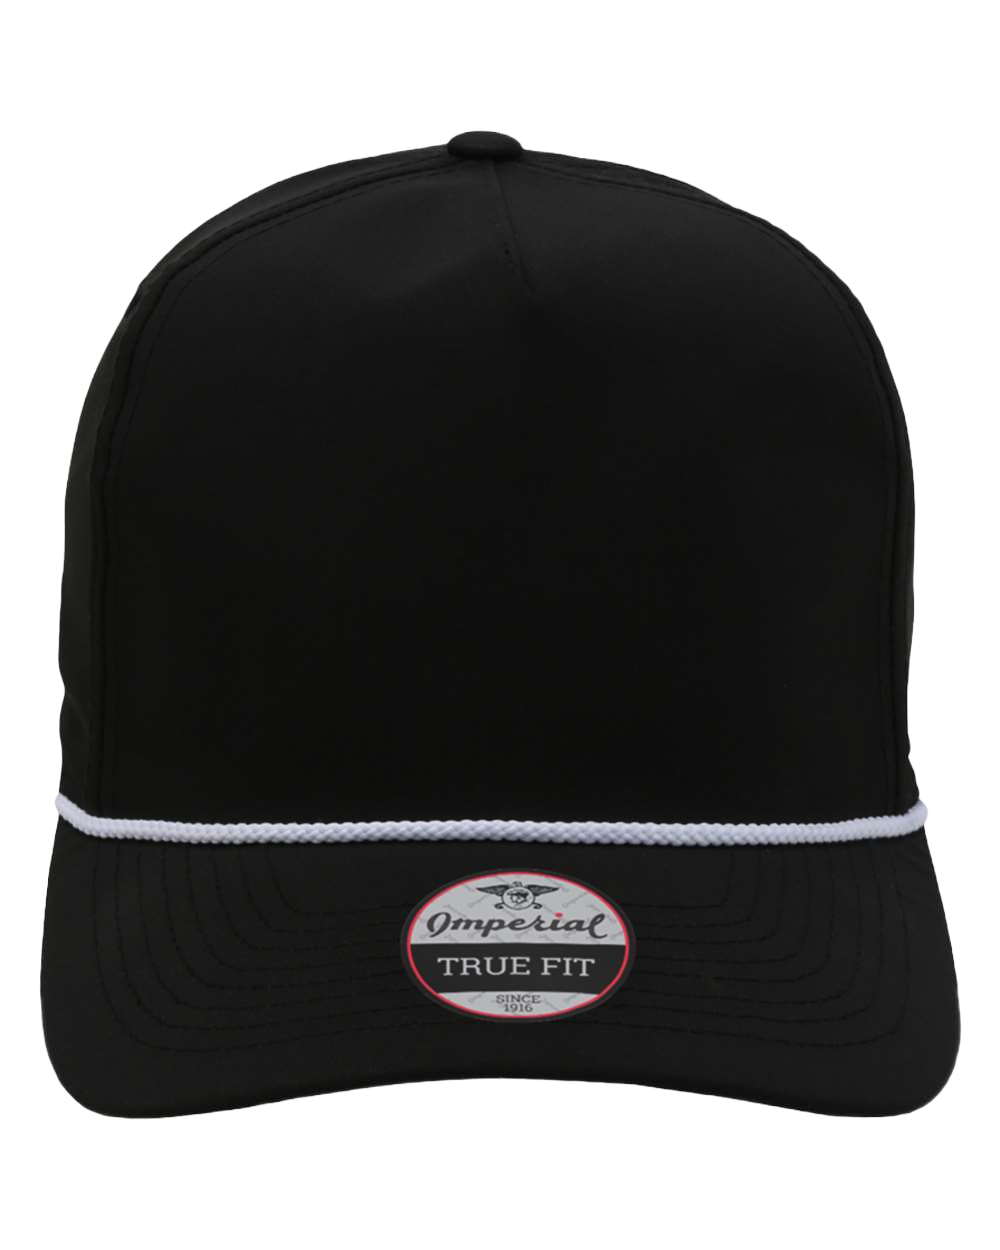 The Wrightson Imperial Cap